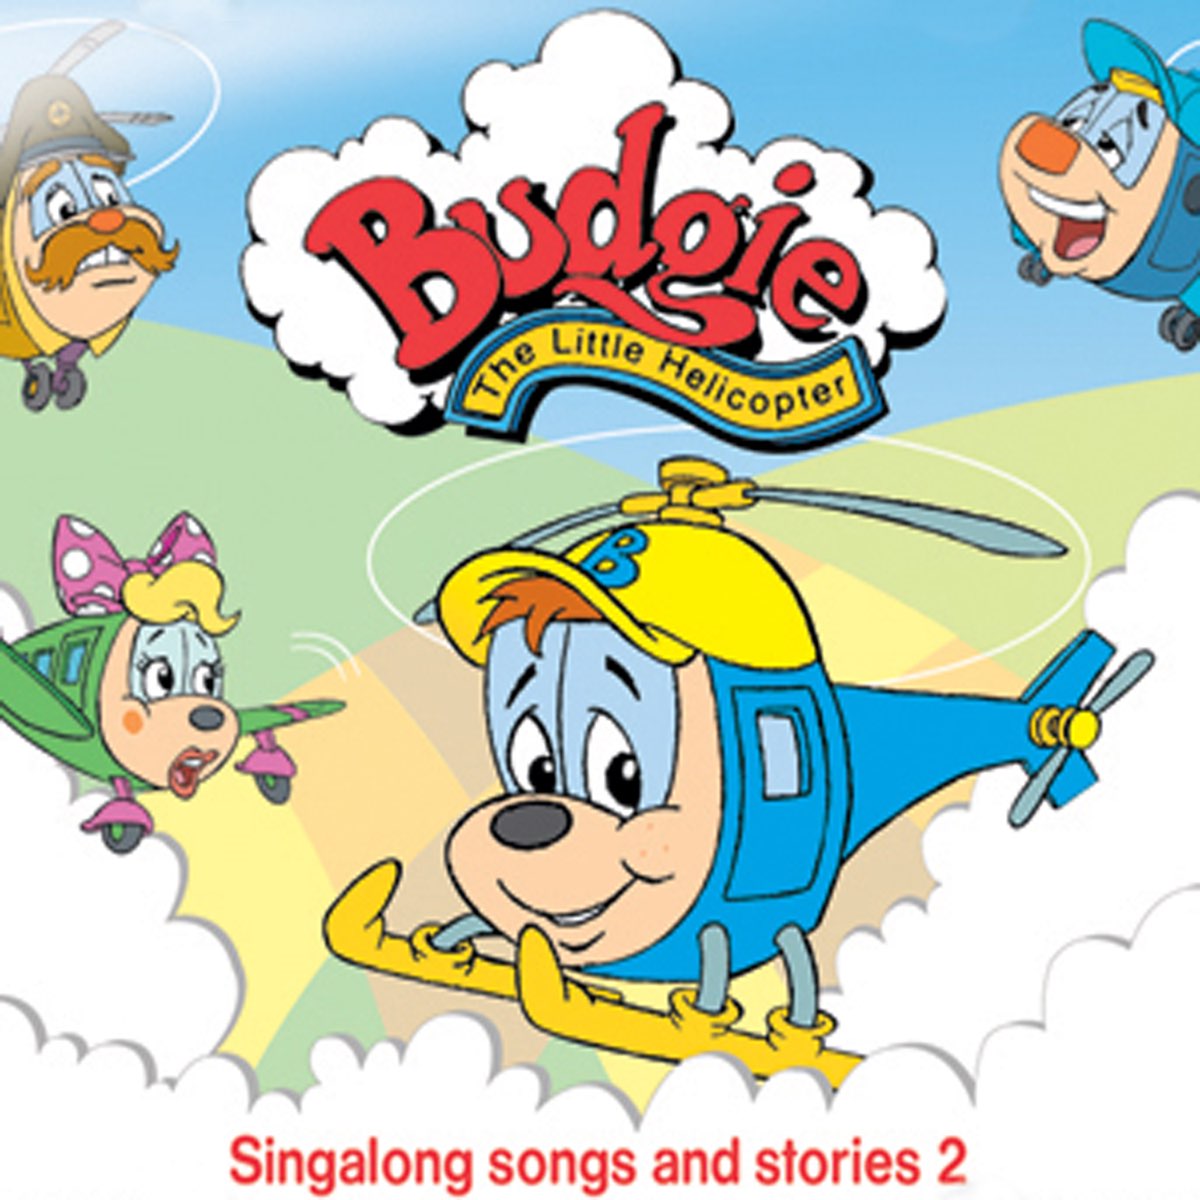 ‎budgie The Little Helicopter Singalong Songs And Stories Volume 3